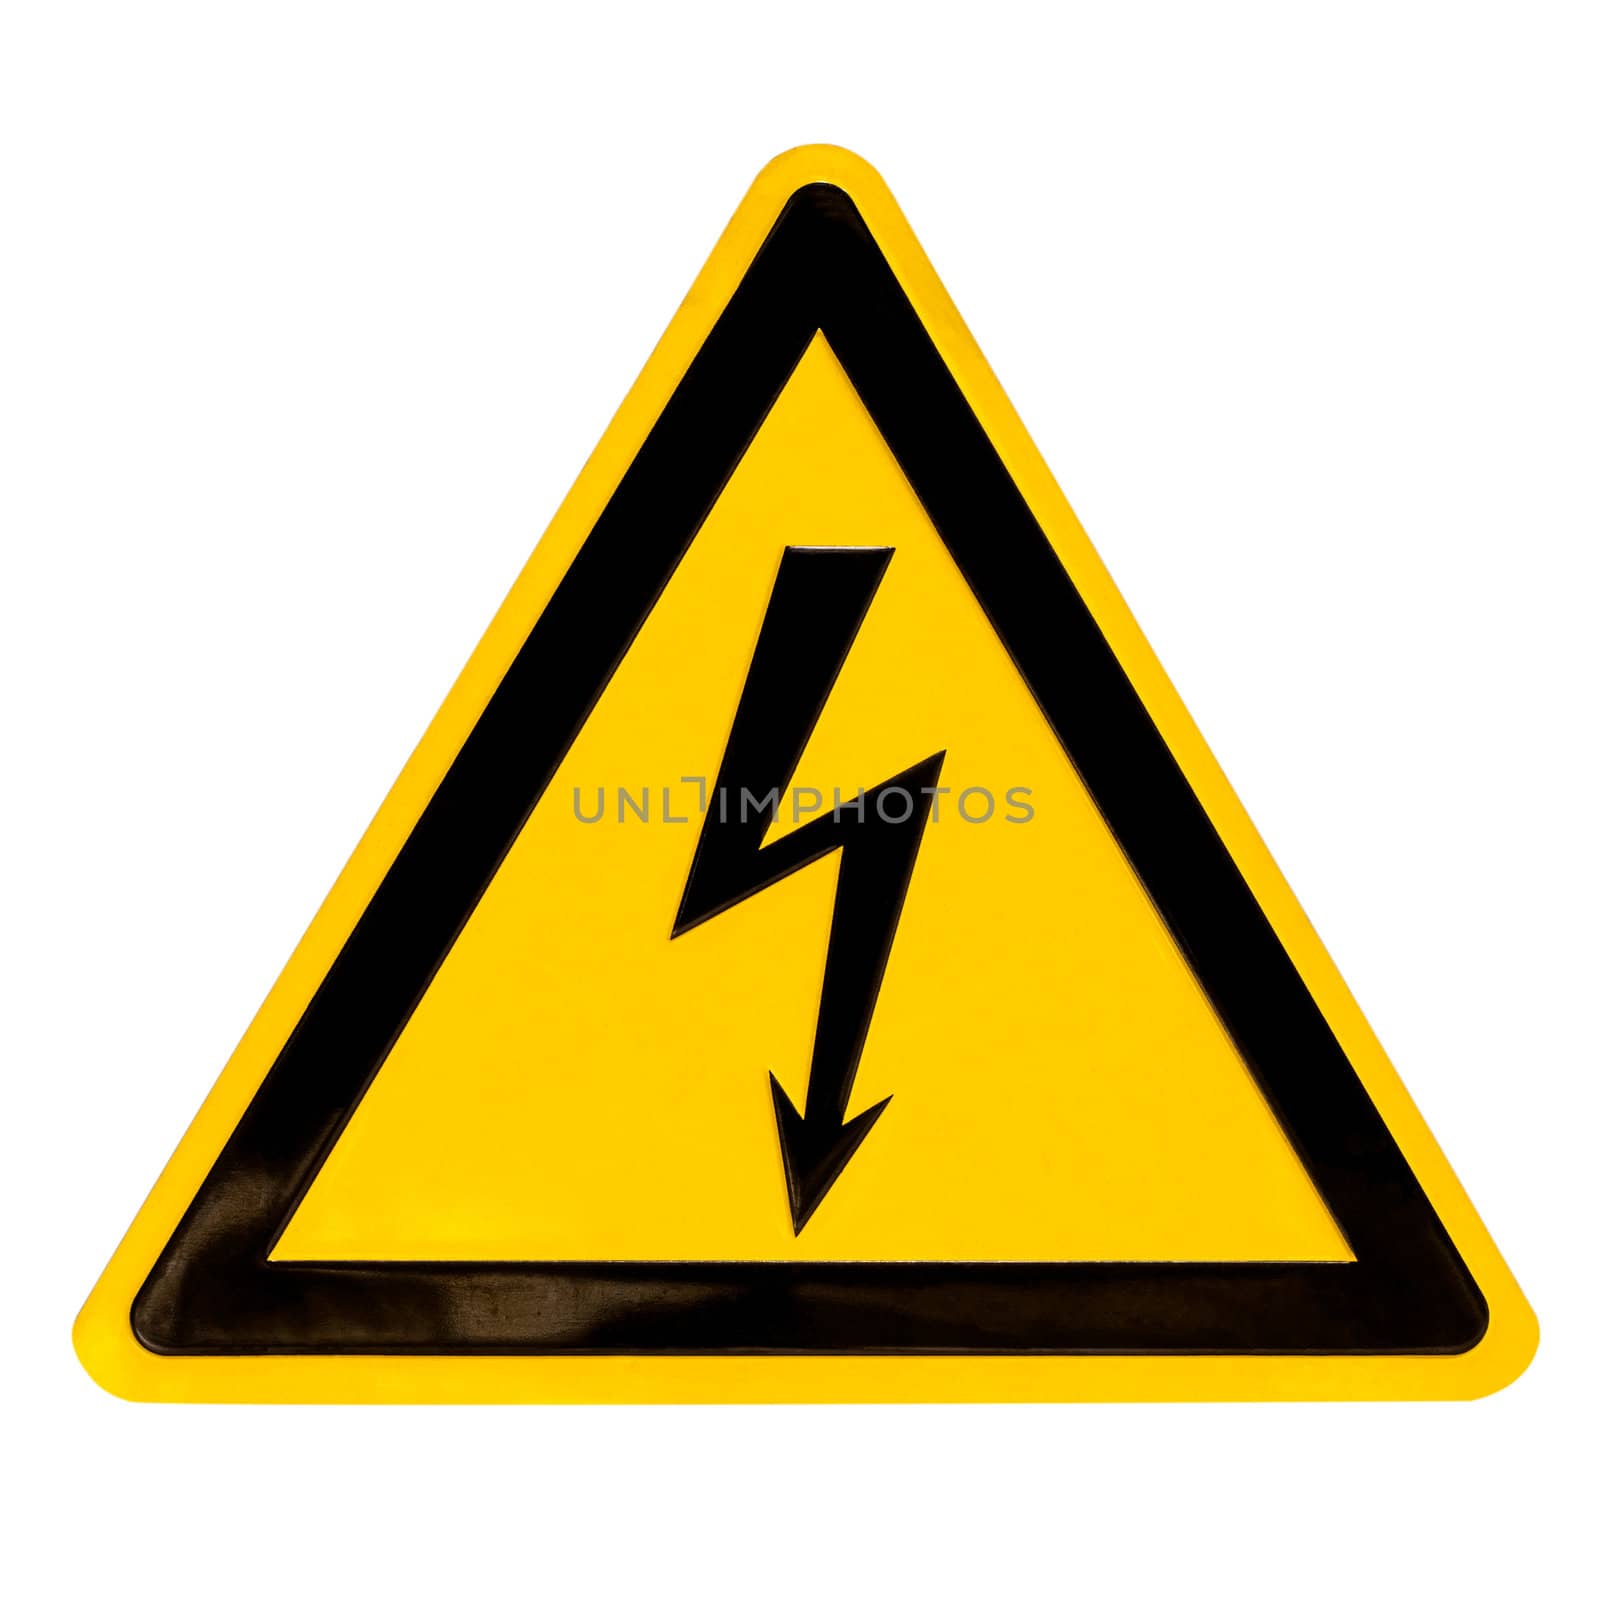 Real metal high voltage danger sign isolated on white